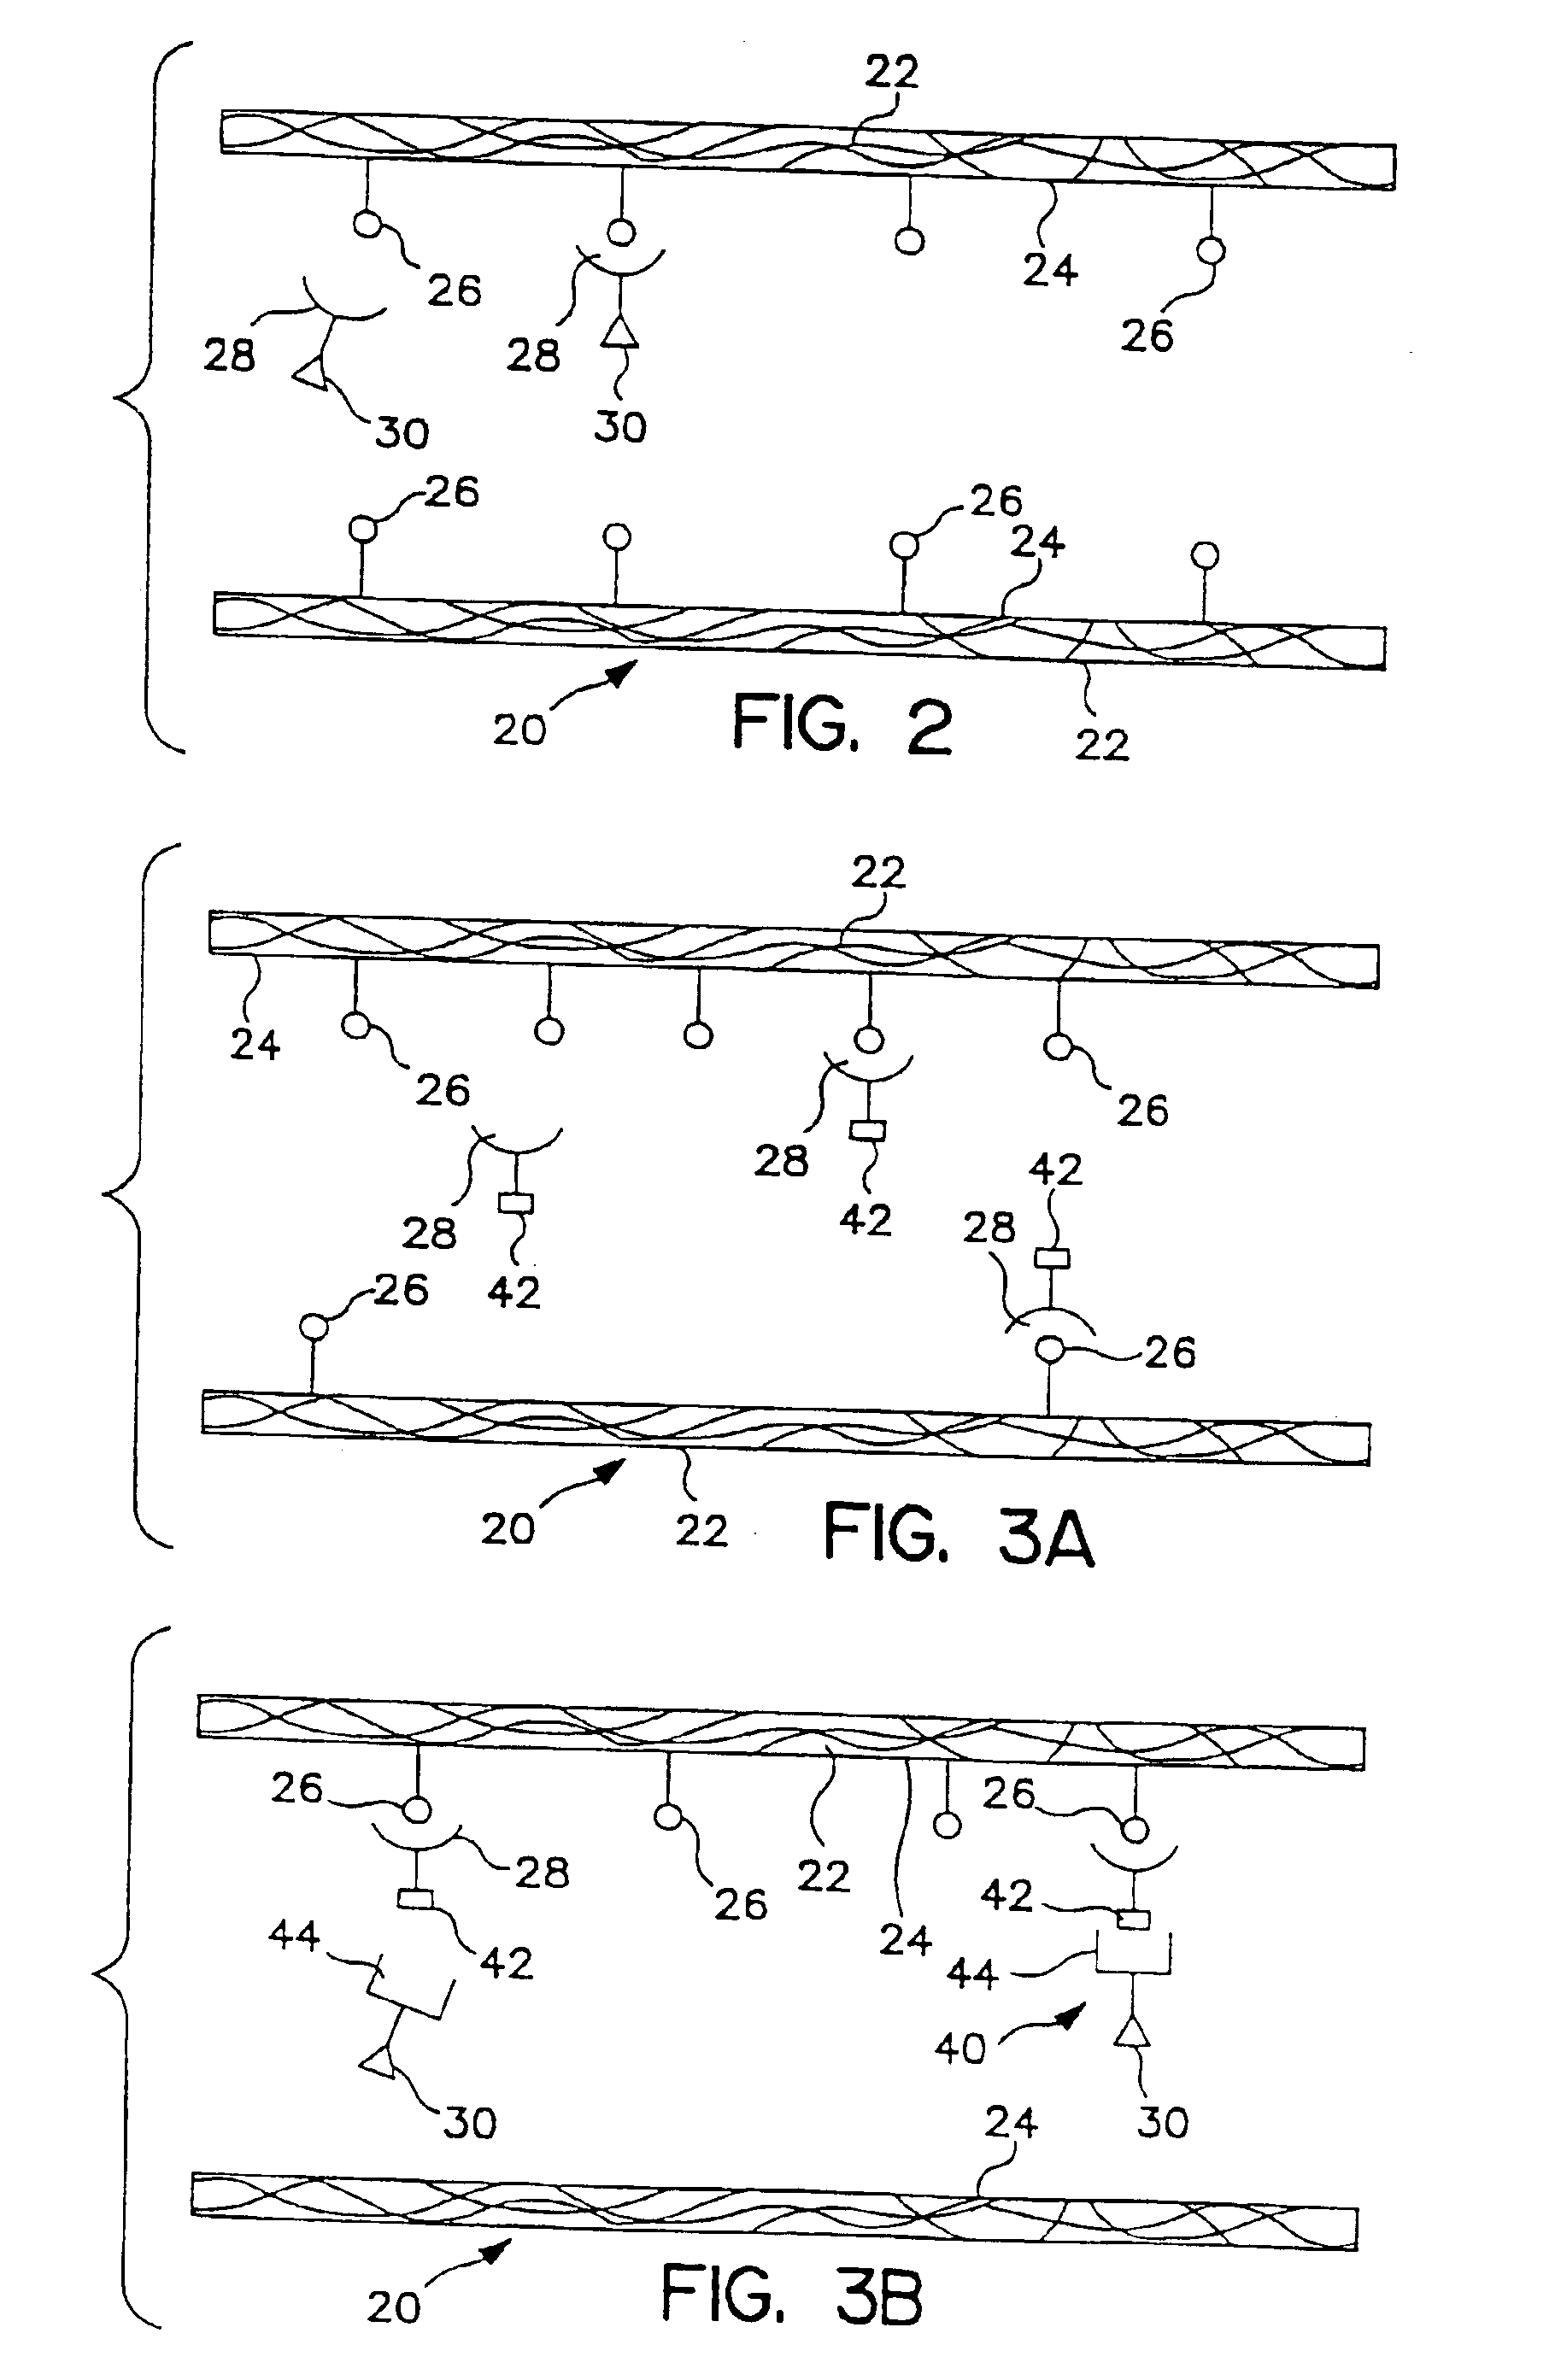 Transcutaneous photodynamic treatment of targeted cells